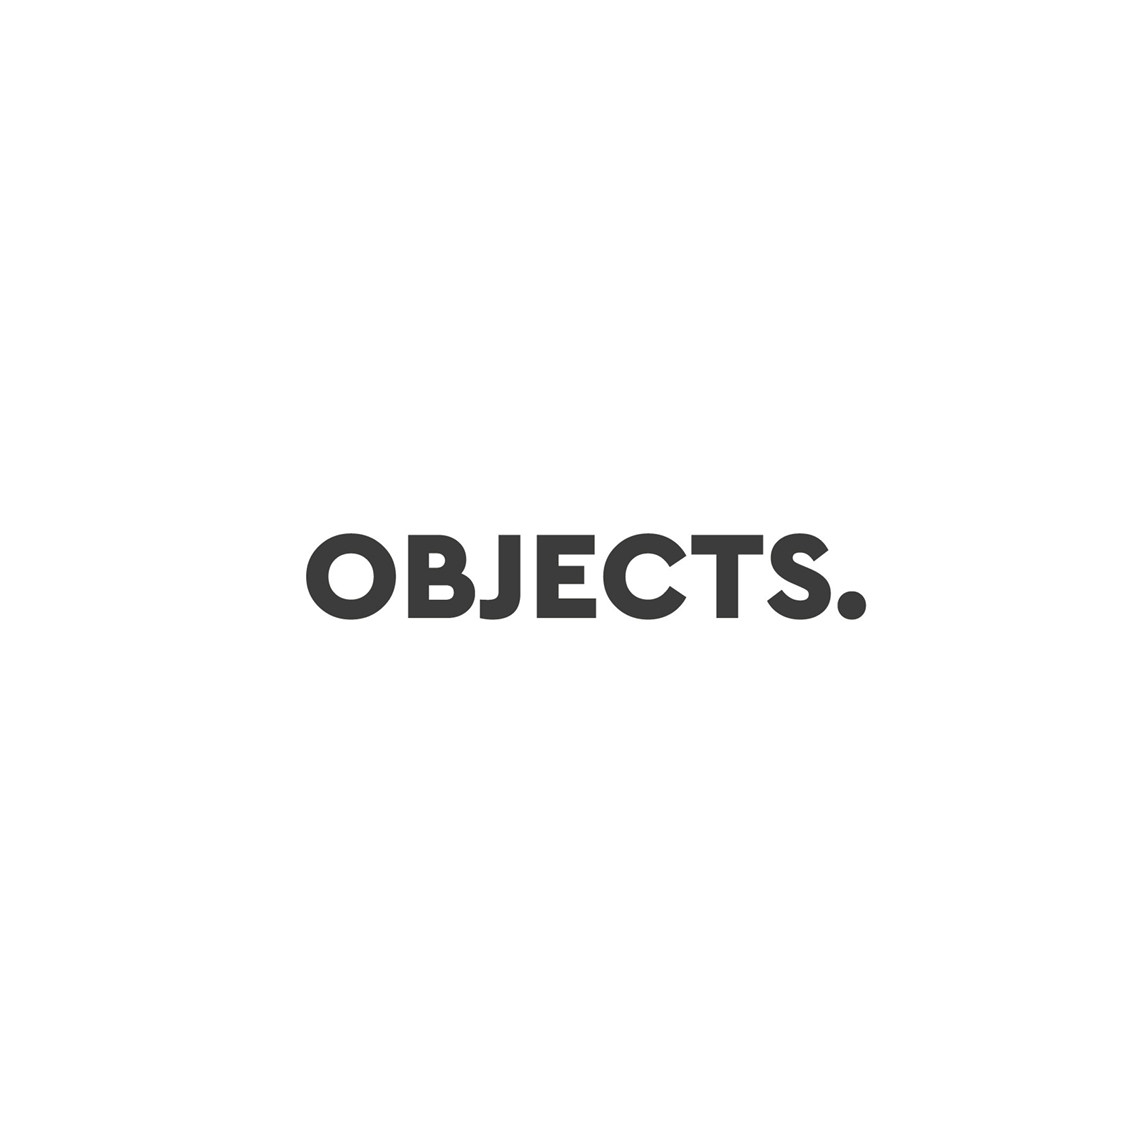 Objects., 2019 MMAPROJECTS S.R.L.